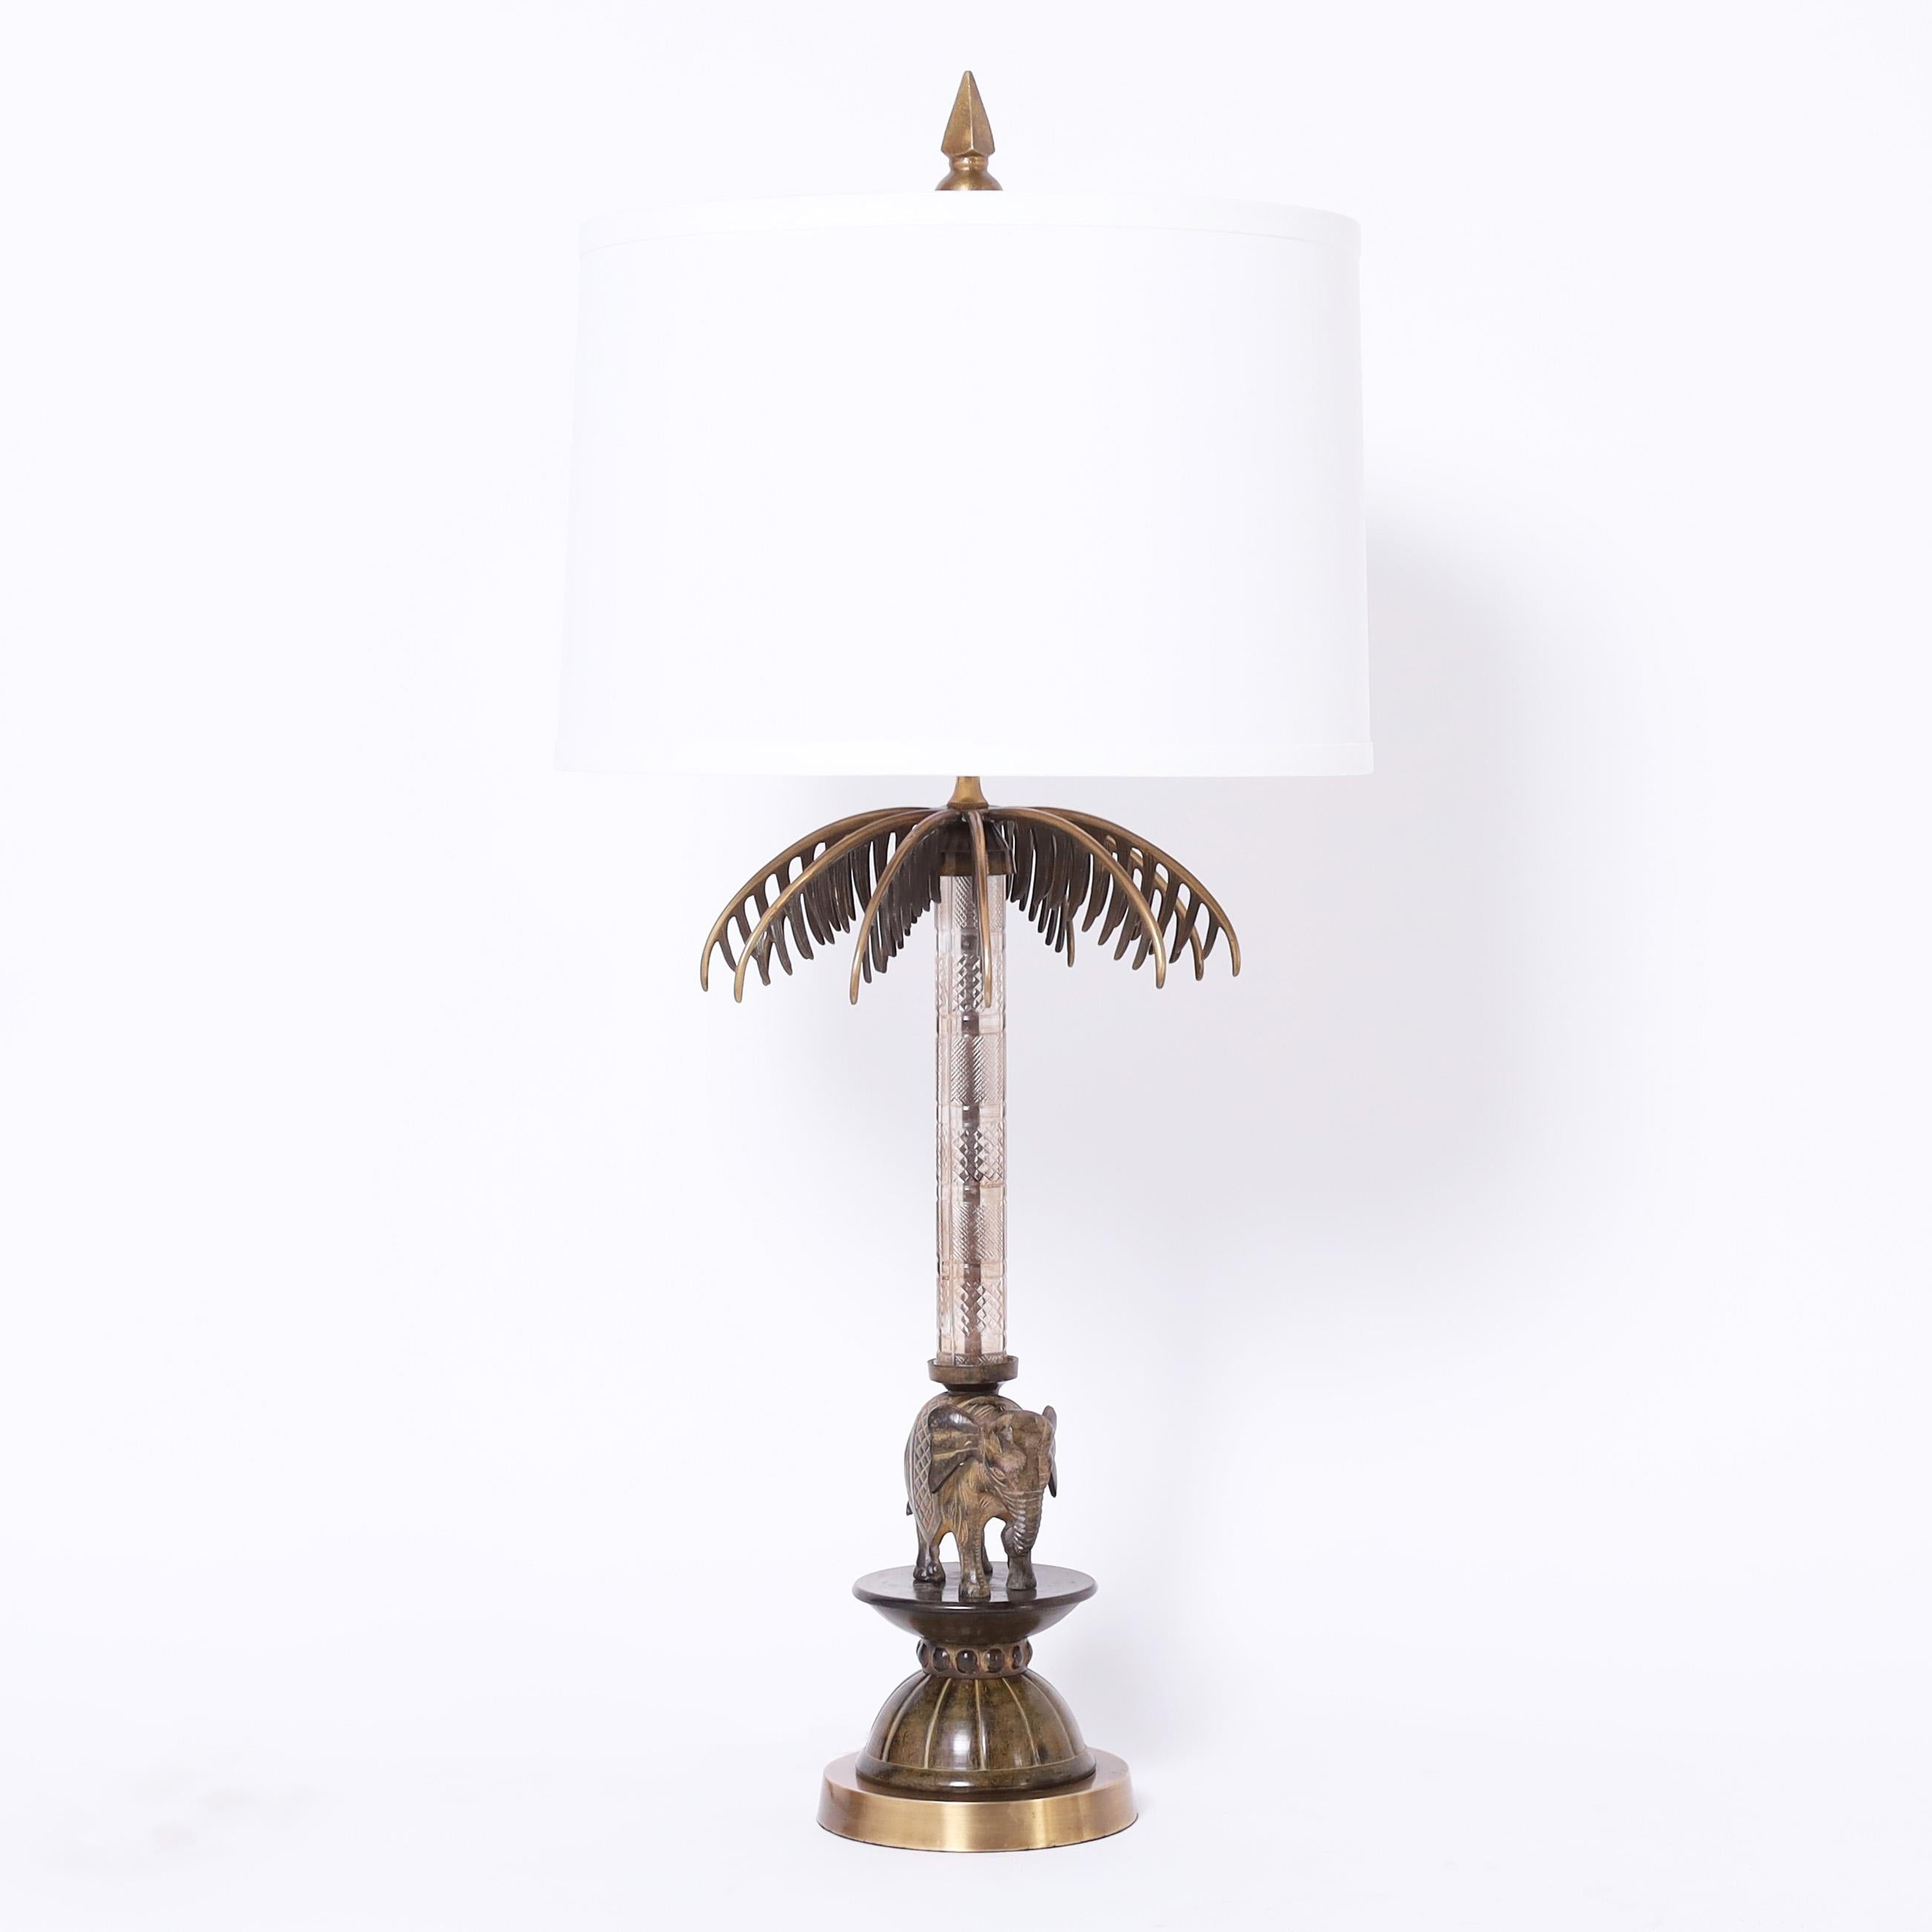 Impressive pair of British Colonial style table lamps with a combination of modern and tradition having stylized bronze finials and palm fronds on a glass post over cast bronze elephants on chic art deco inspired pedestals.